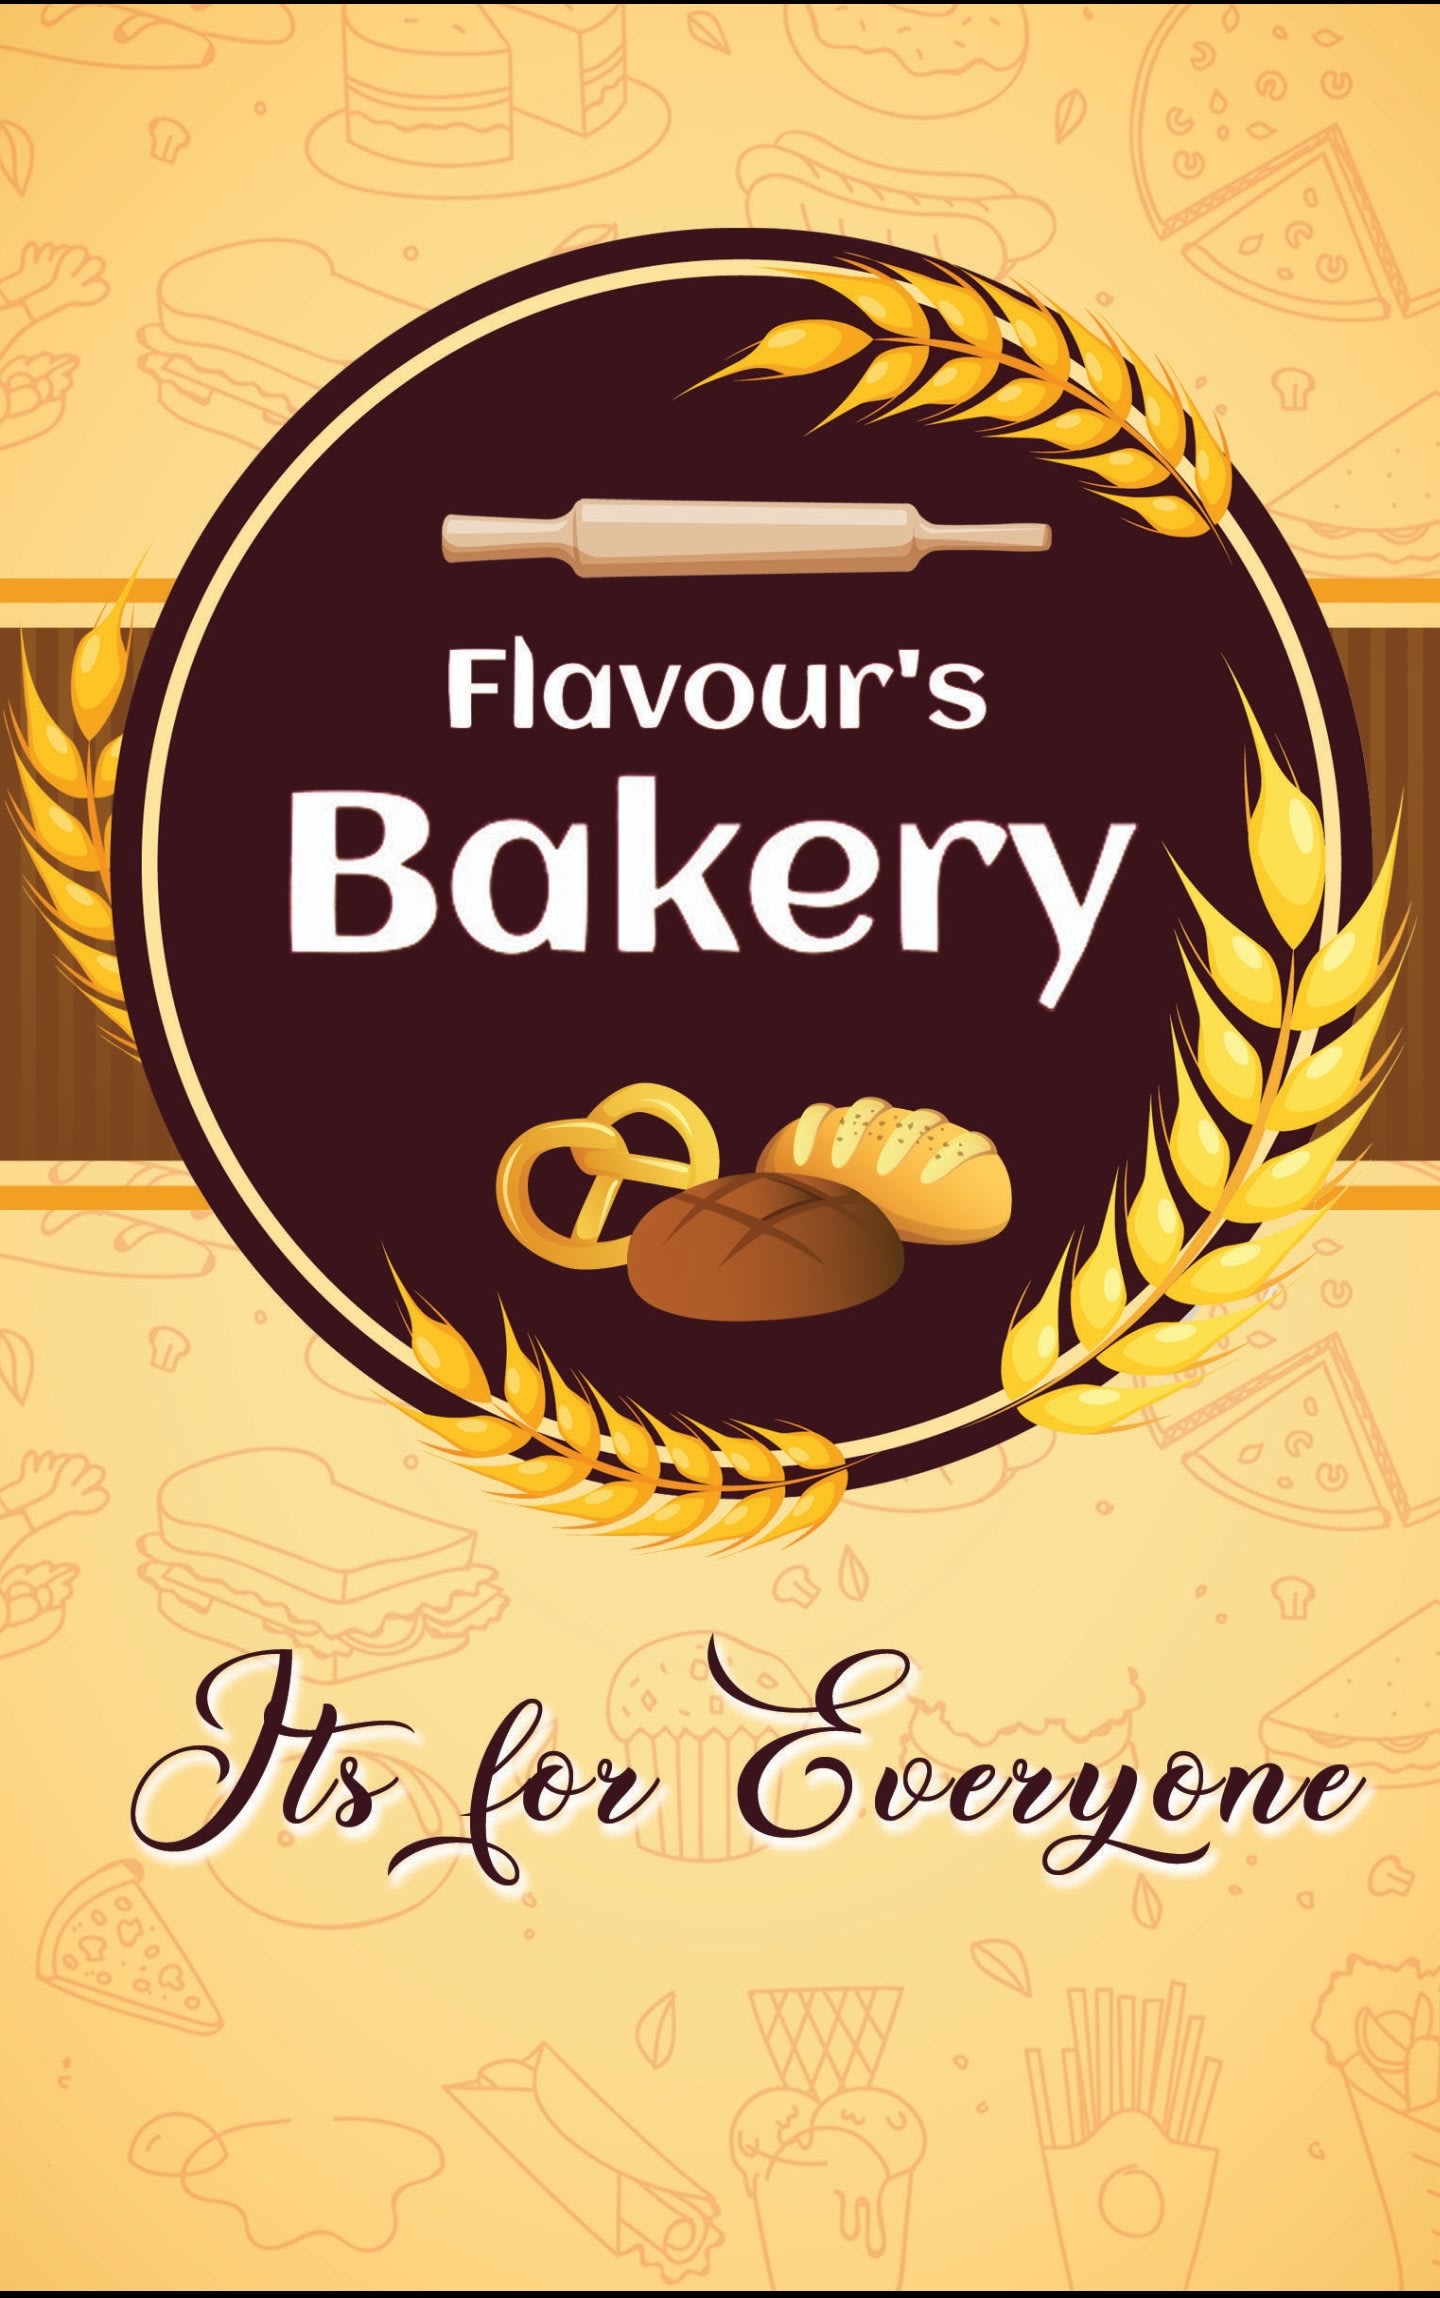 Flavour's Bakery